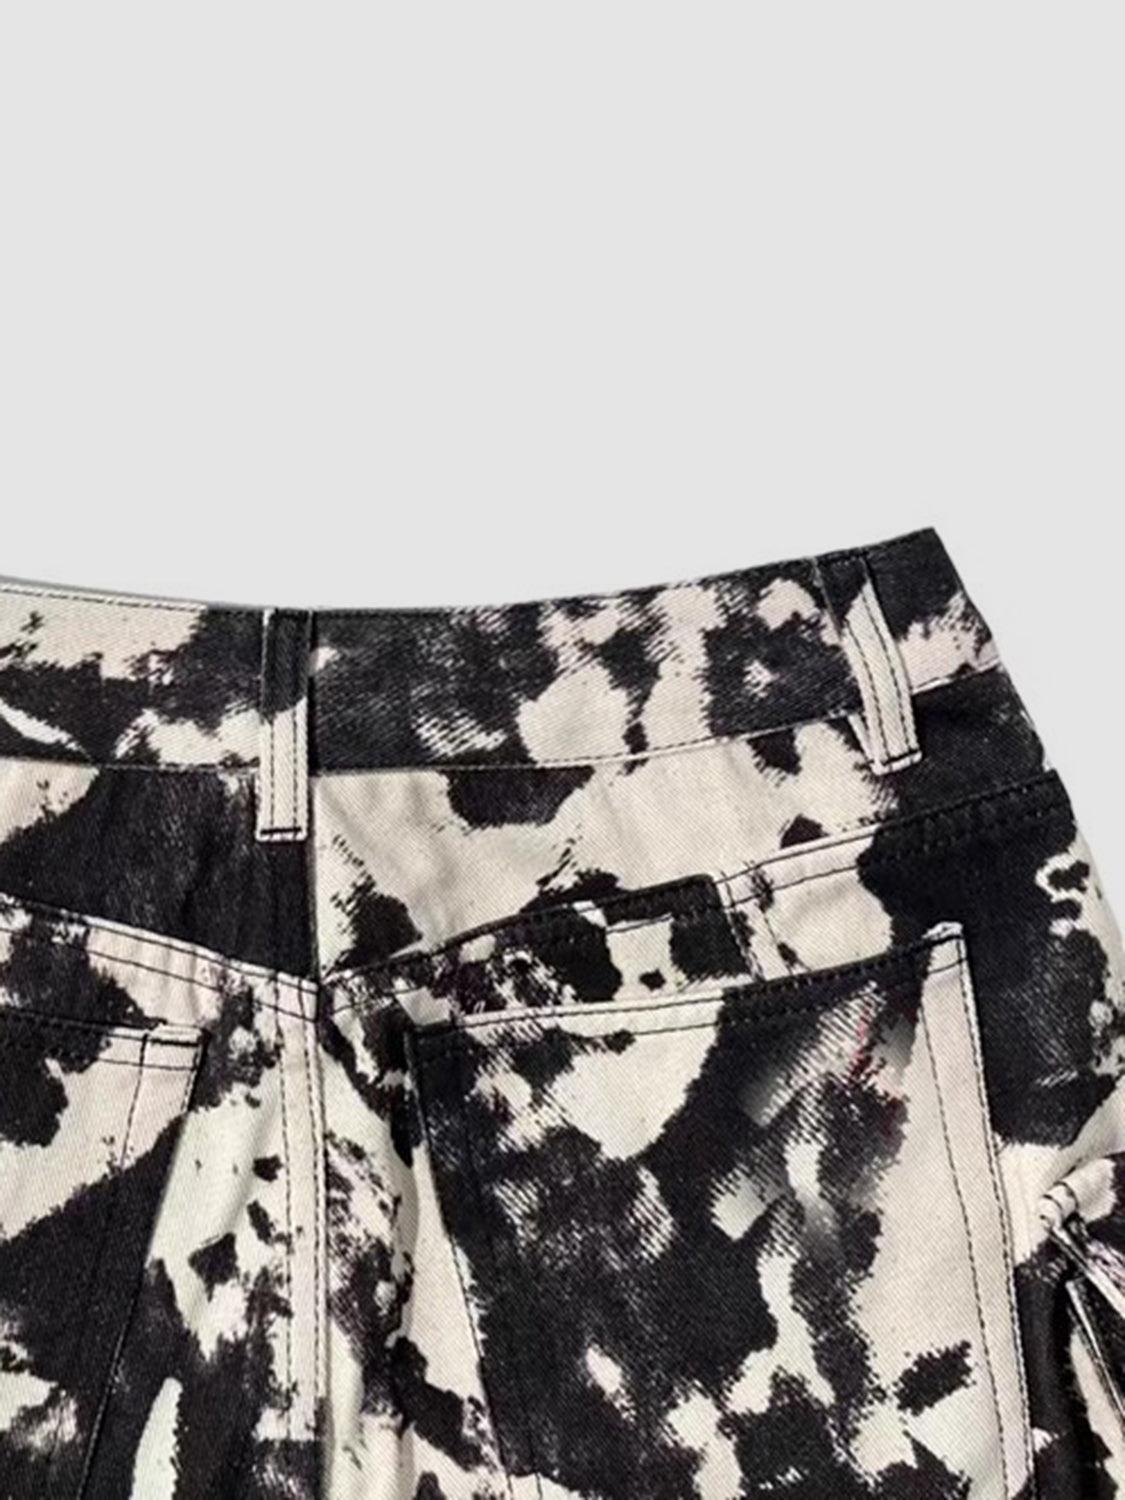 a pair of black and white shorts with a tie dye pattern